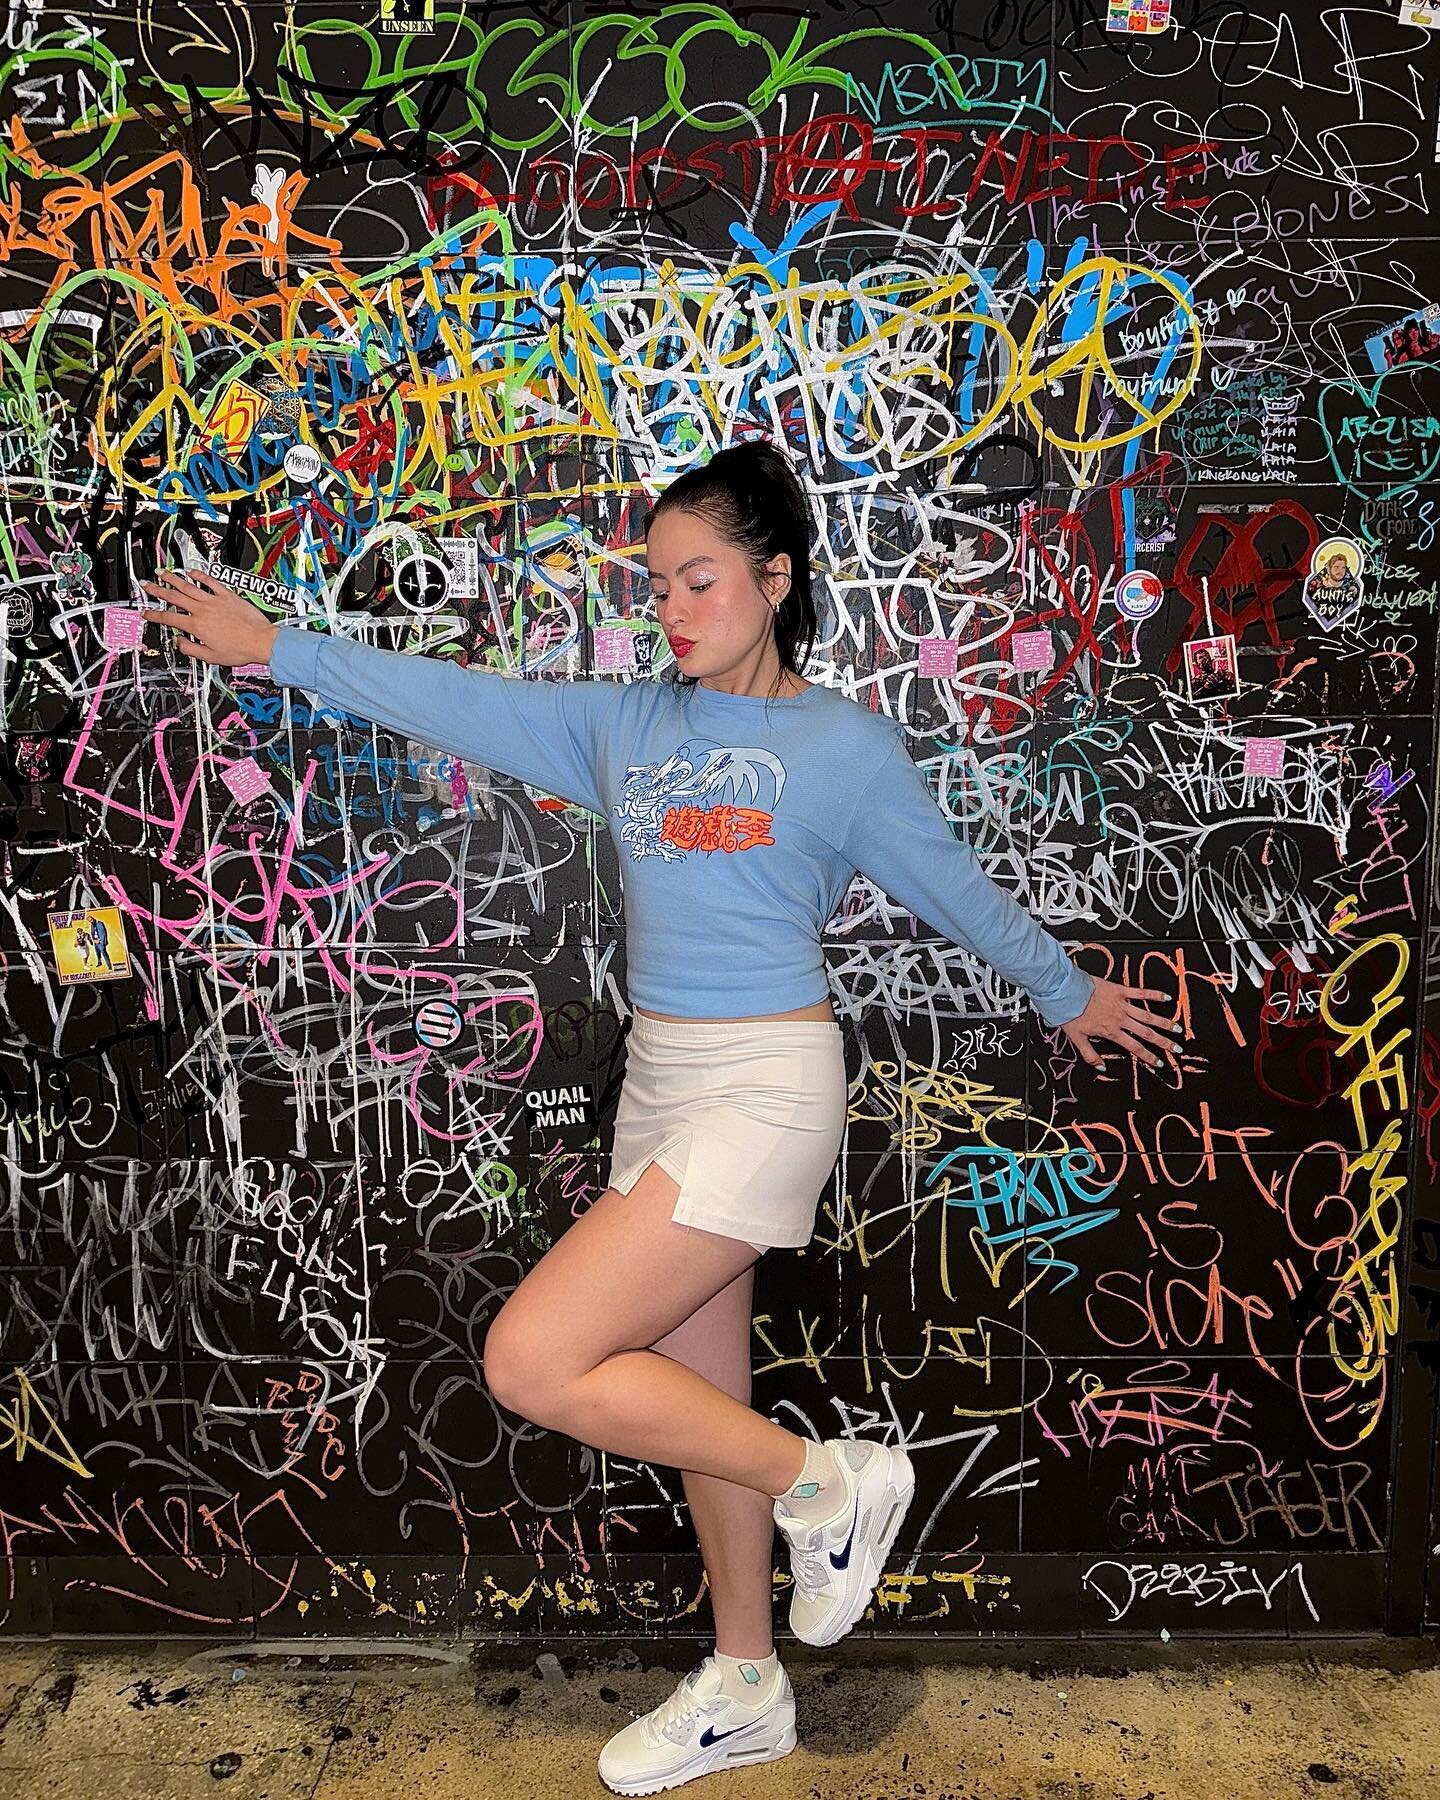 From my camera roll&mdash;

① graffiti bathroom @1720warehouse is so fun lol
② i love my bb blu chrome nails 
③ copped my blue eyes dragon sleeve from depop for $17
④ ✌🏻✌🏻 
⑤ 👍🏻👍🏻
⑥ the @psychictype you alone mashup always hits
➆ this is in my 